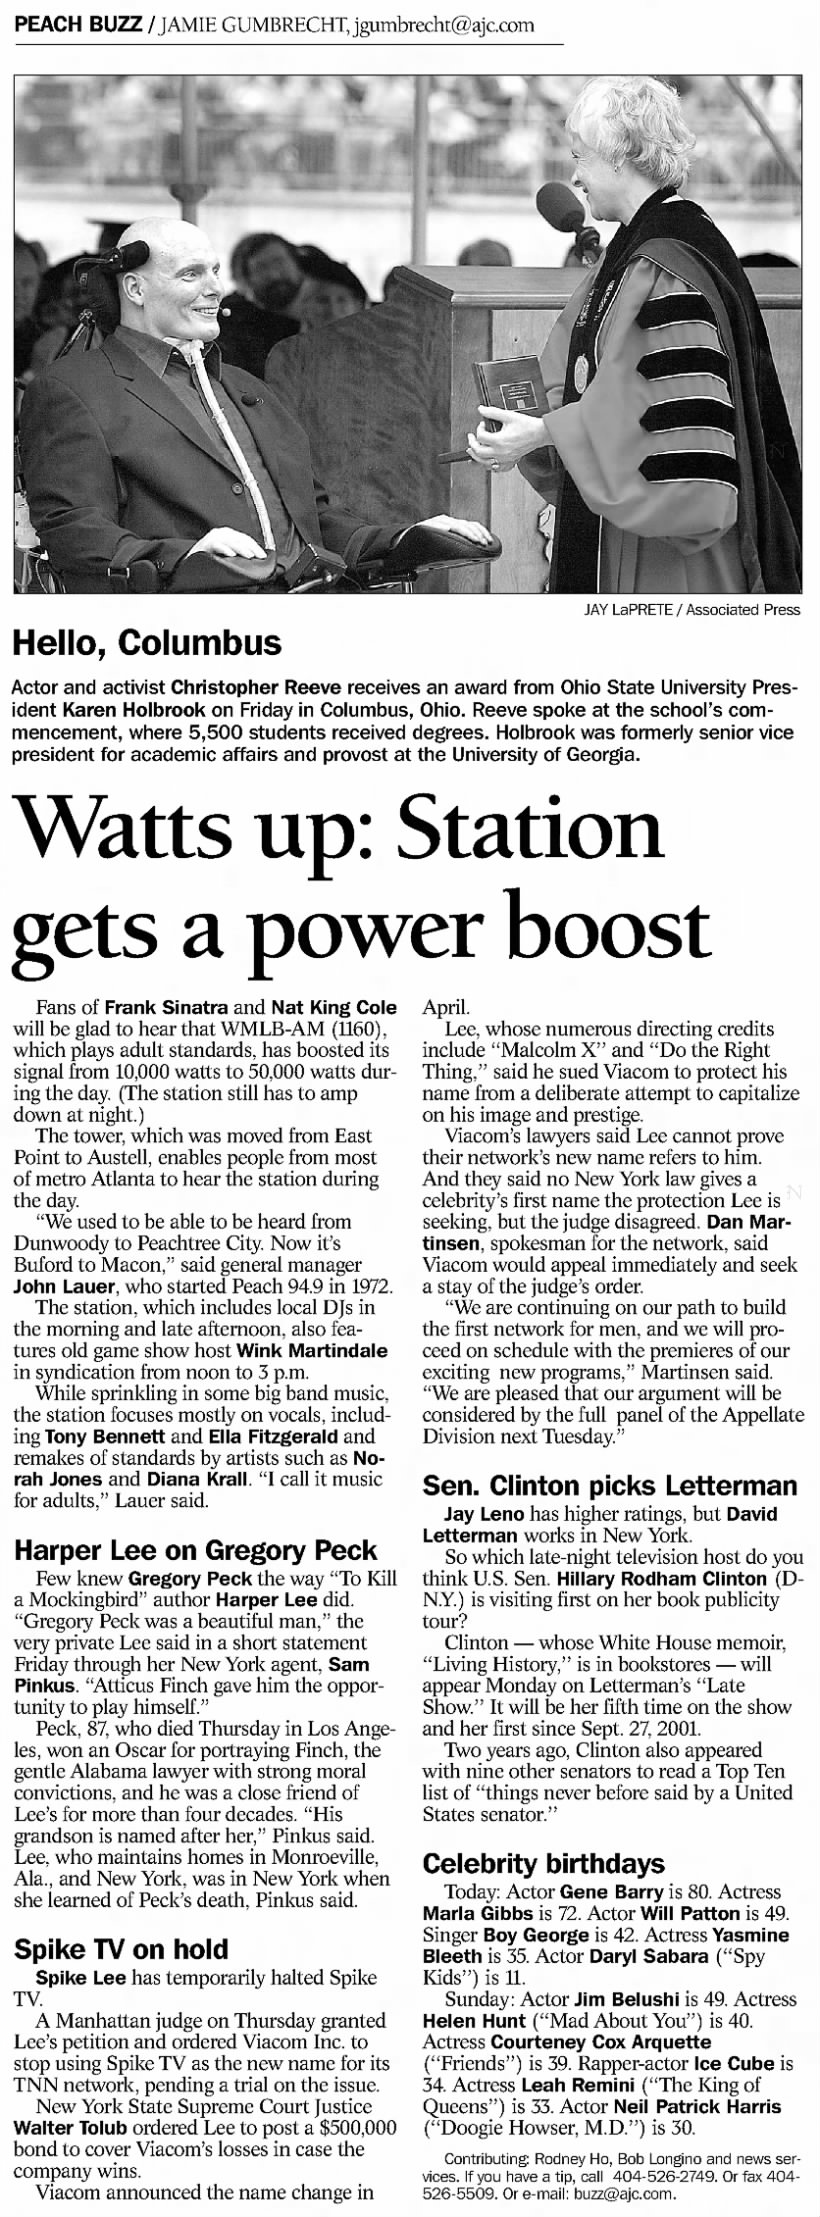 Watts up: Station gets a power boost